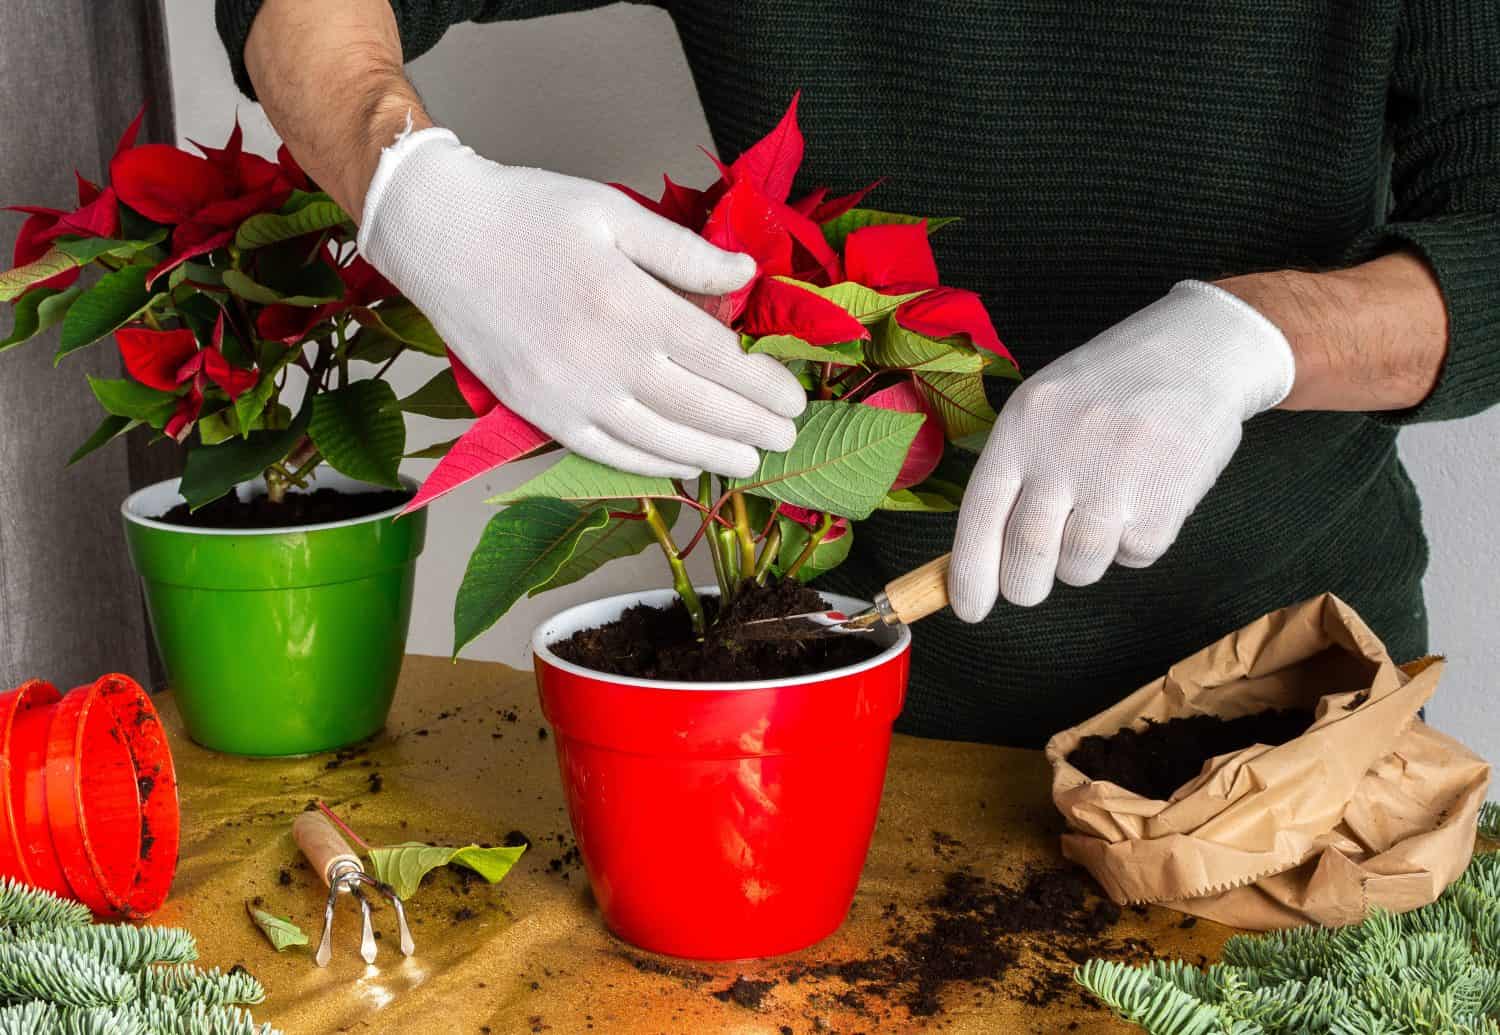 Transplanting Poinsettia Christmas Flowers into red and green pots, man transplanting flowers, home decoration at Christmas,Merry Christmas Concept